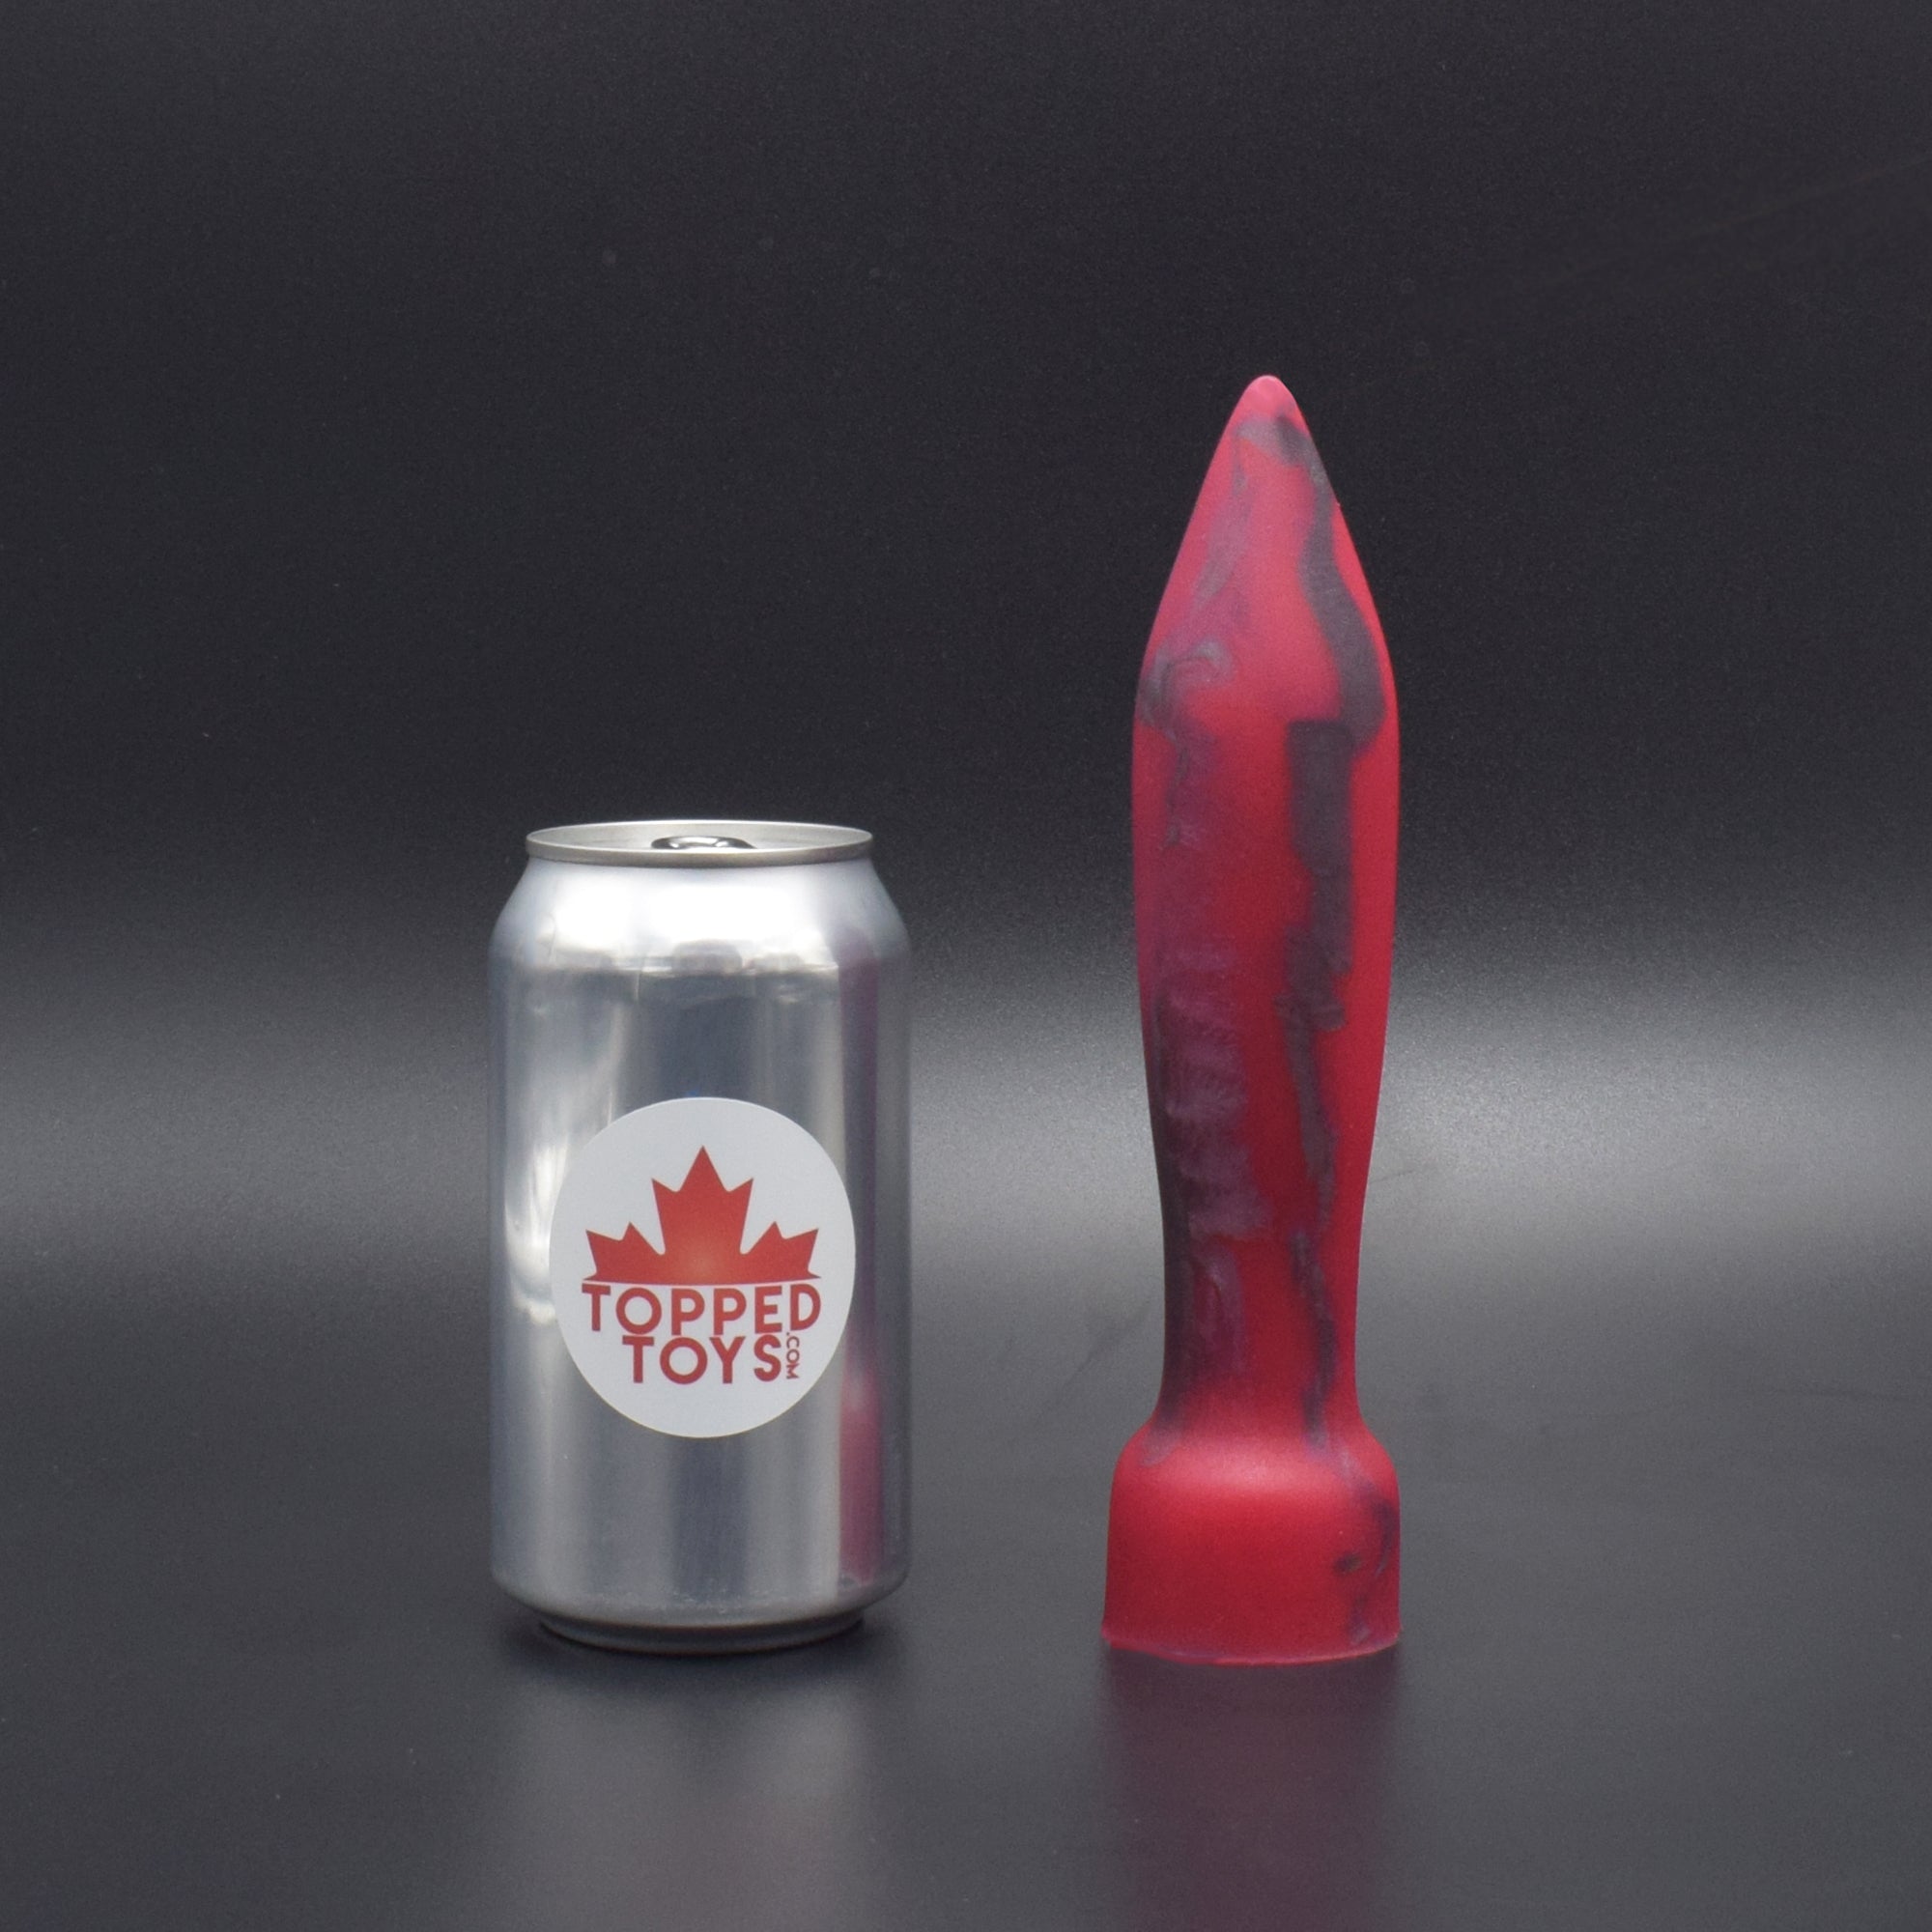 Deep Space 50 in Forge Red, next to pop can with Topped Toys logo